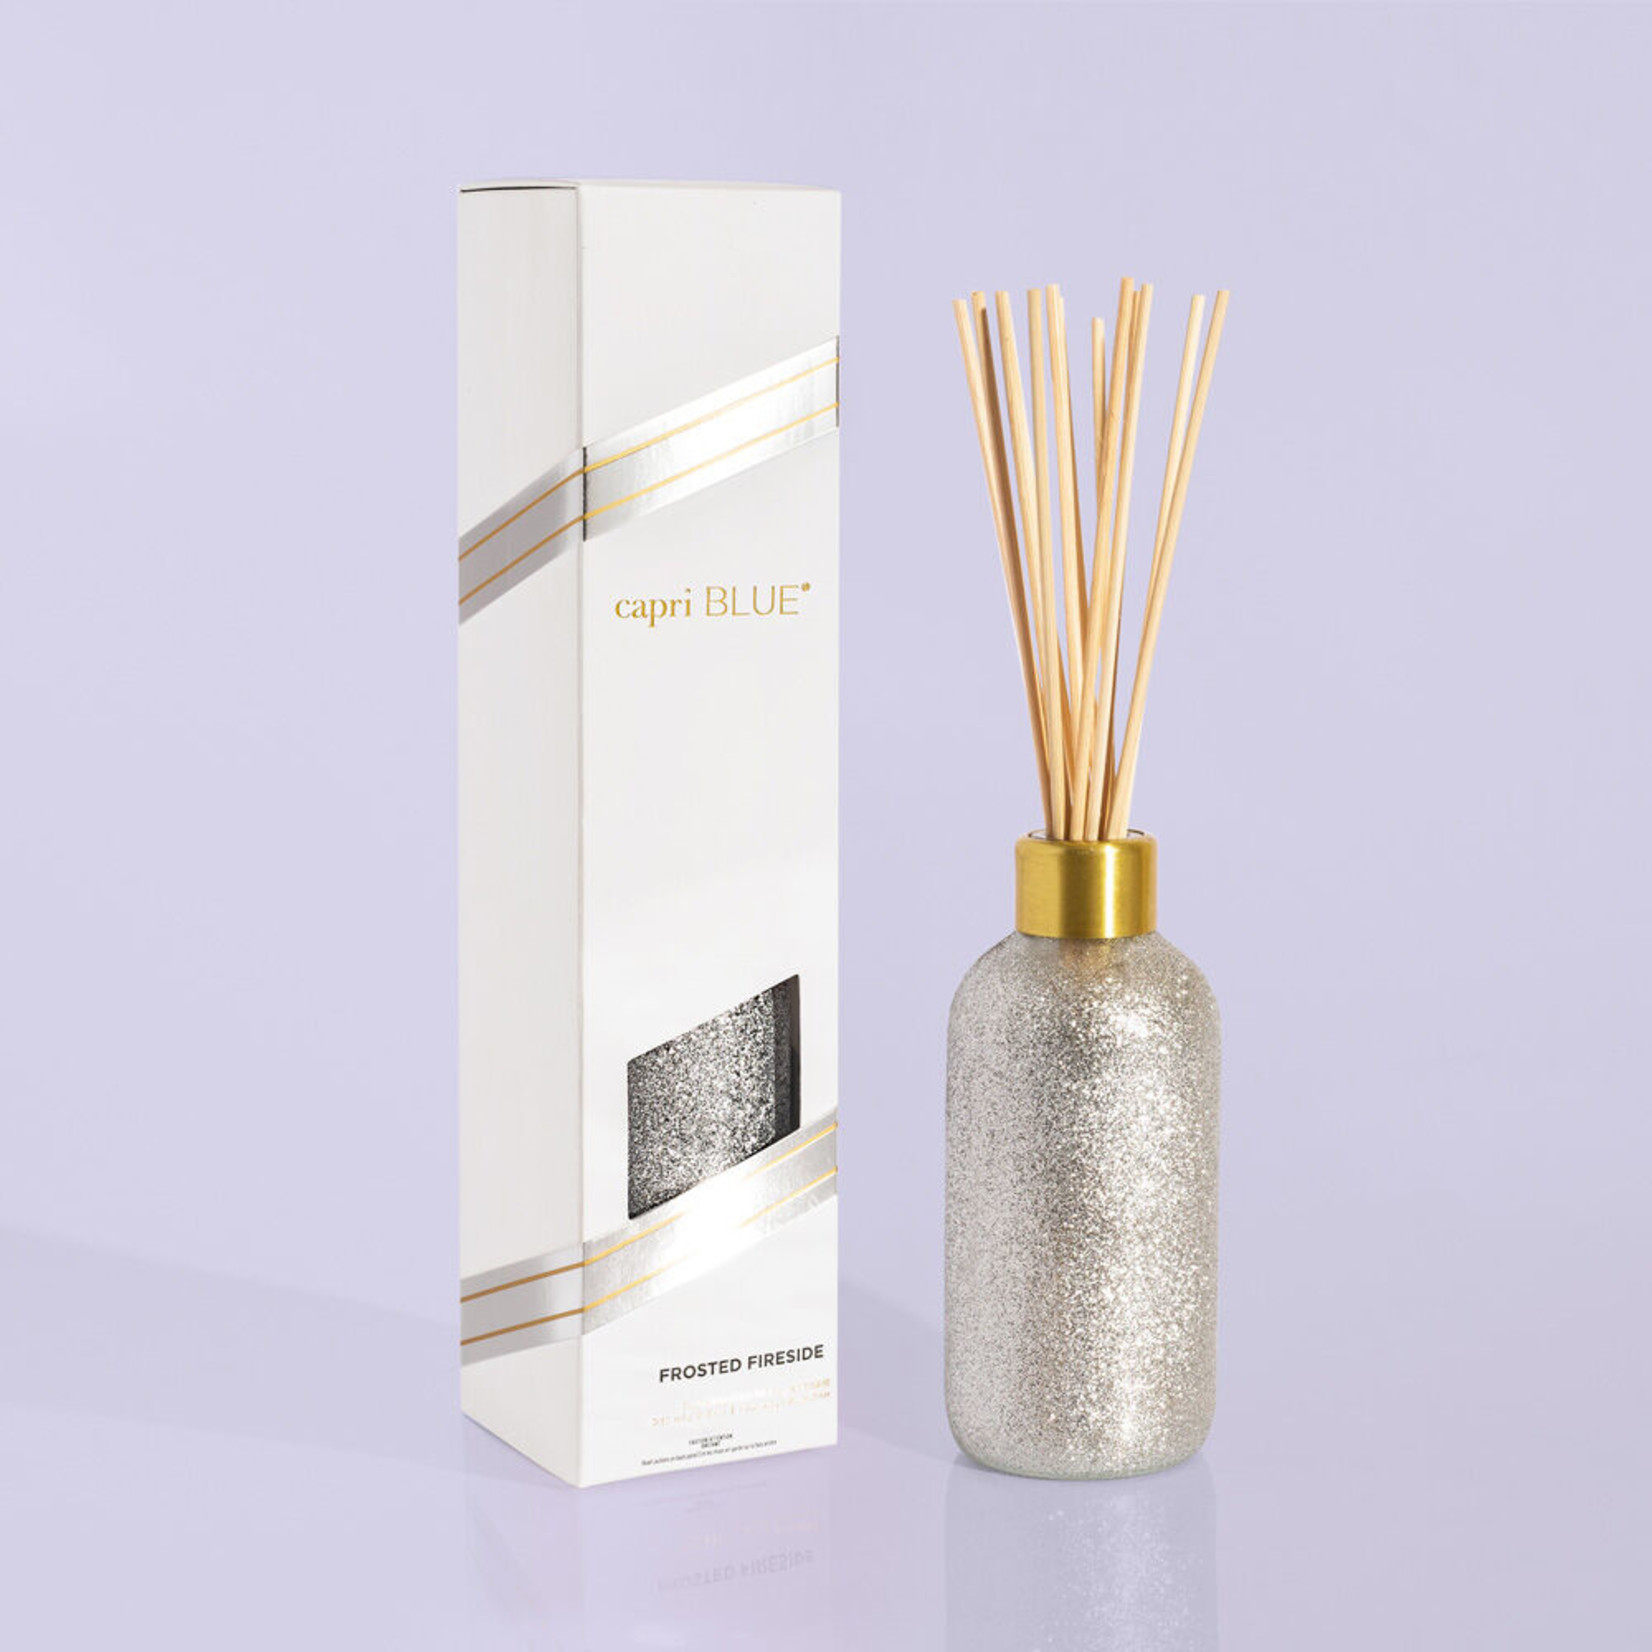 Capri Blue Frosted Fireside Glam Reed Diffuser 8oz